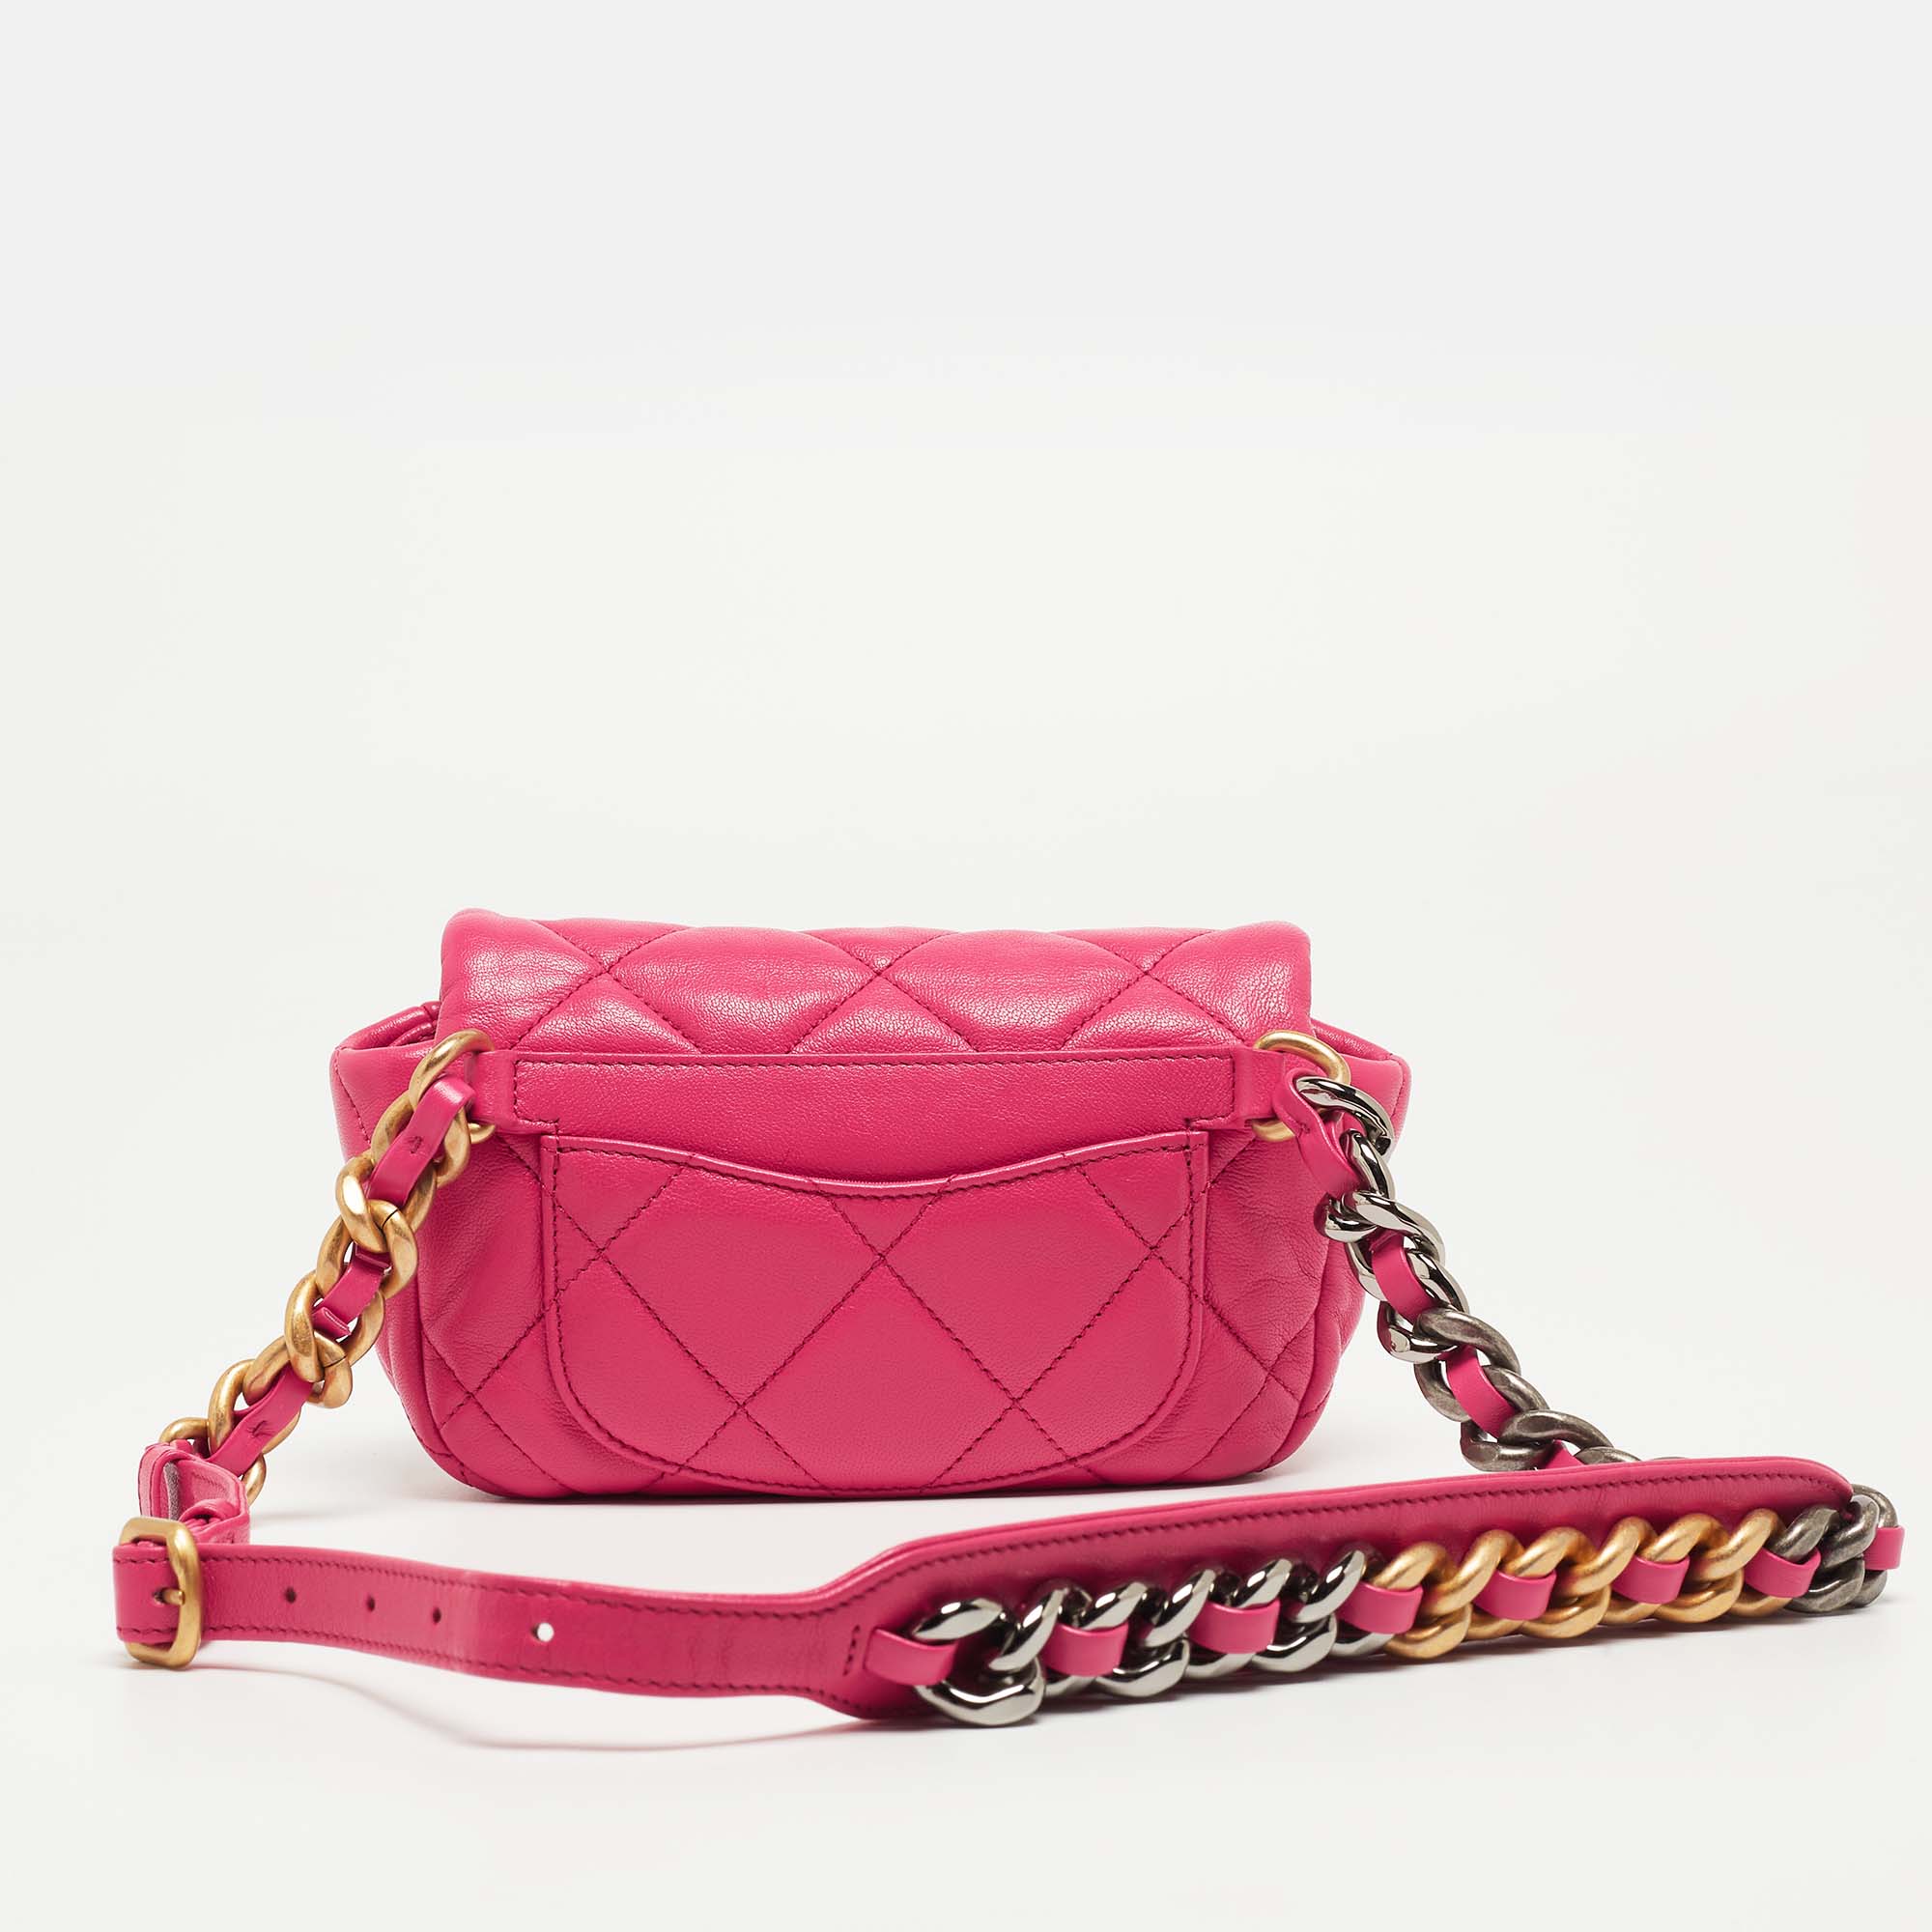 Chanel Pink Quilted Leather CC 19 Waist Bag